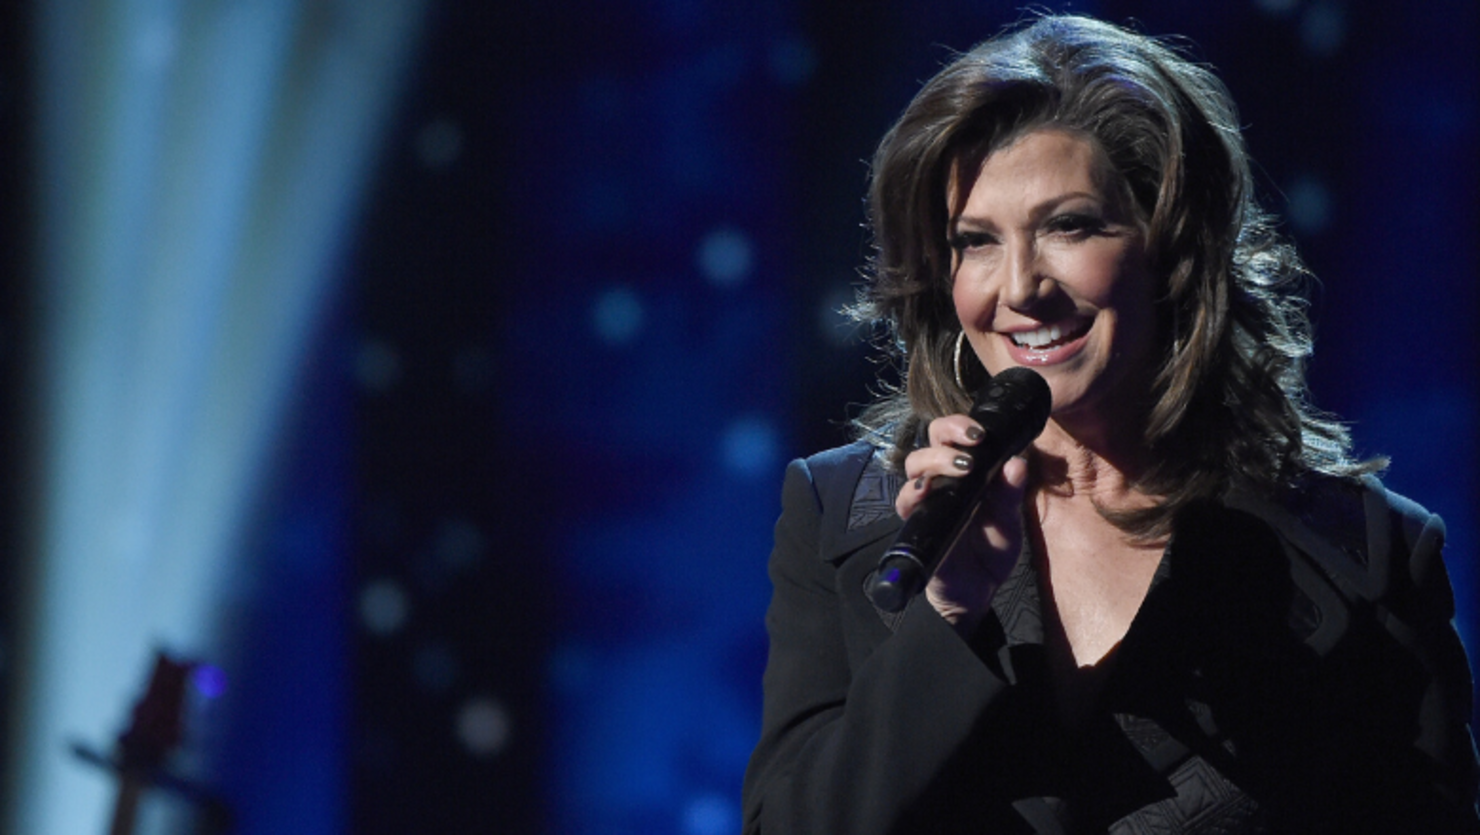 Amy Grant Undergoes Surgery To Correct Heart Condition